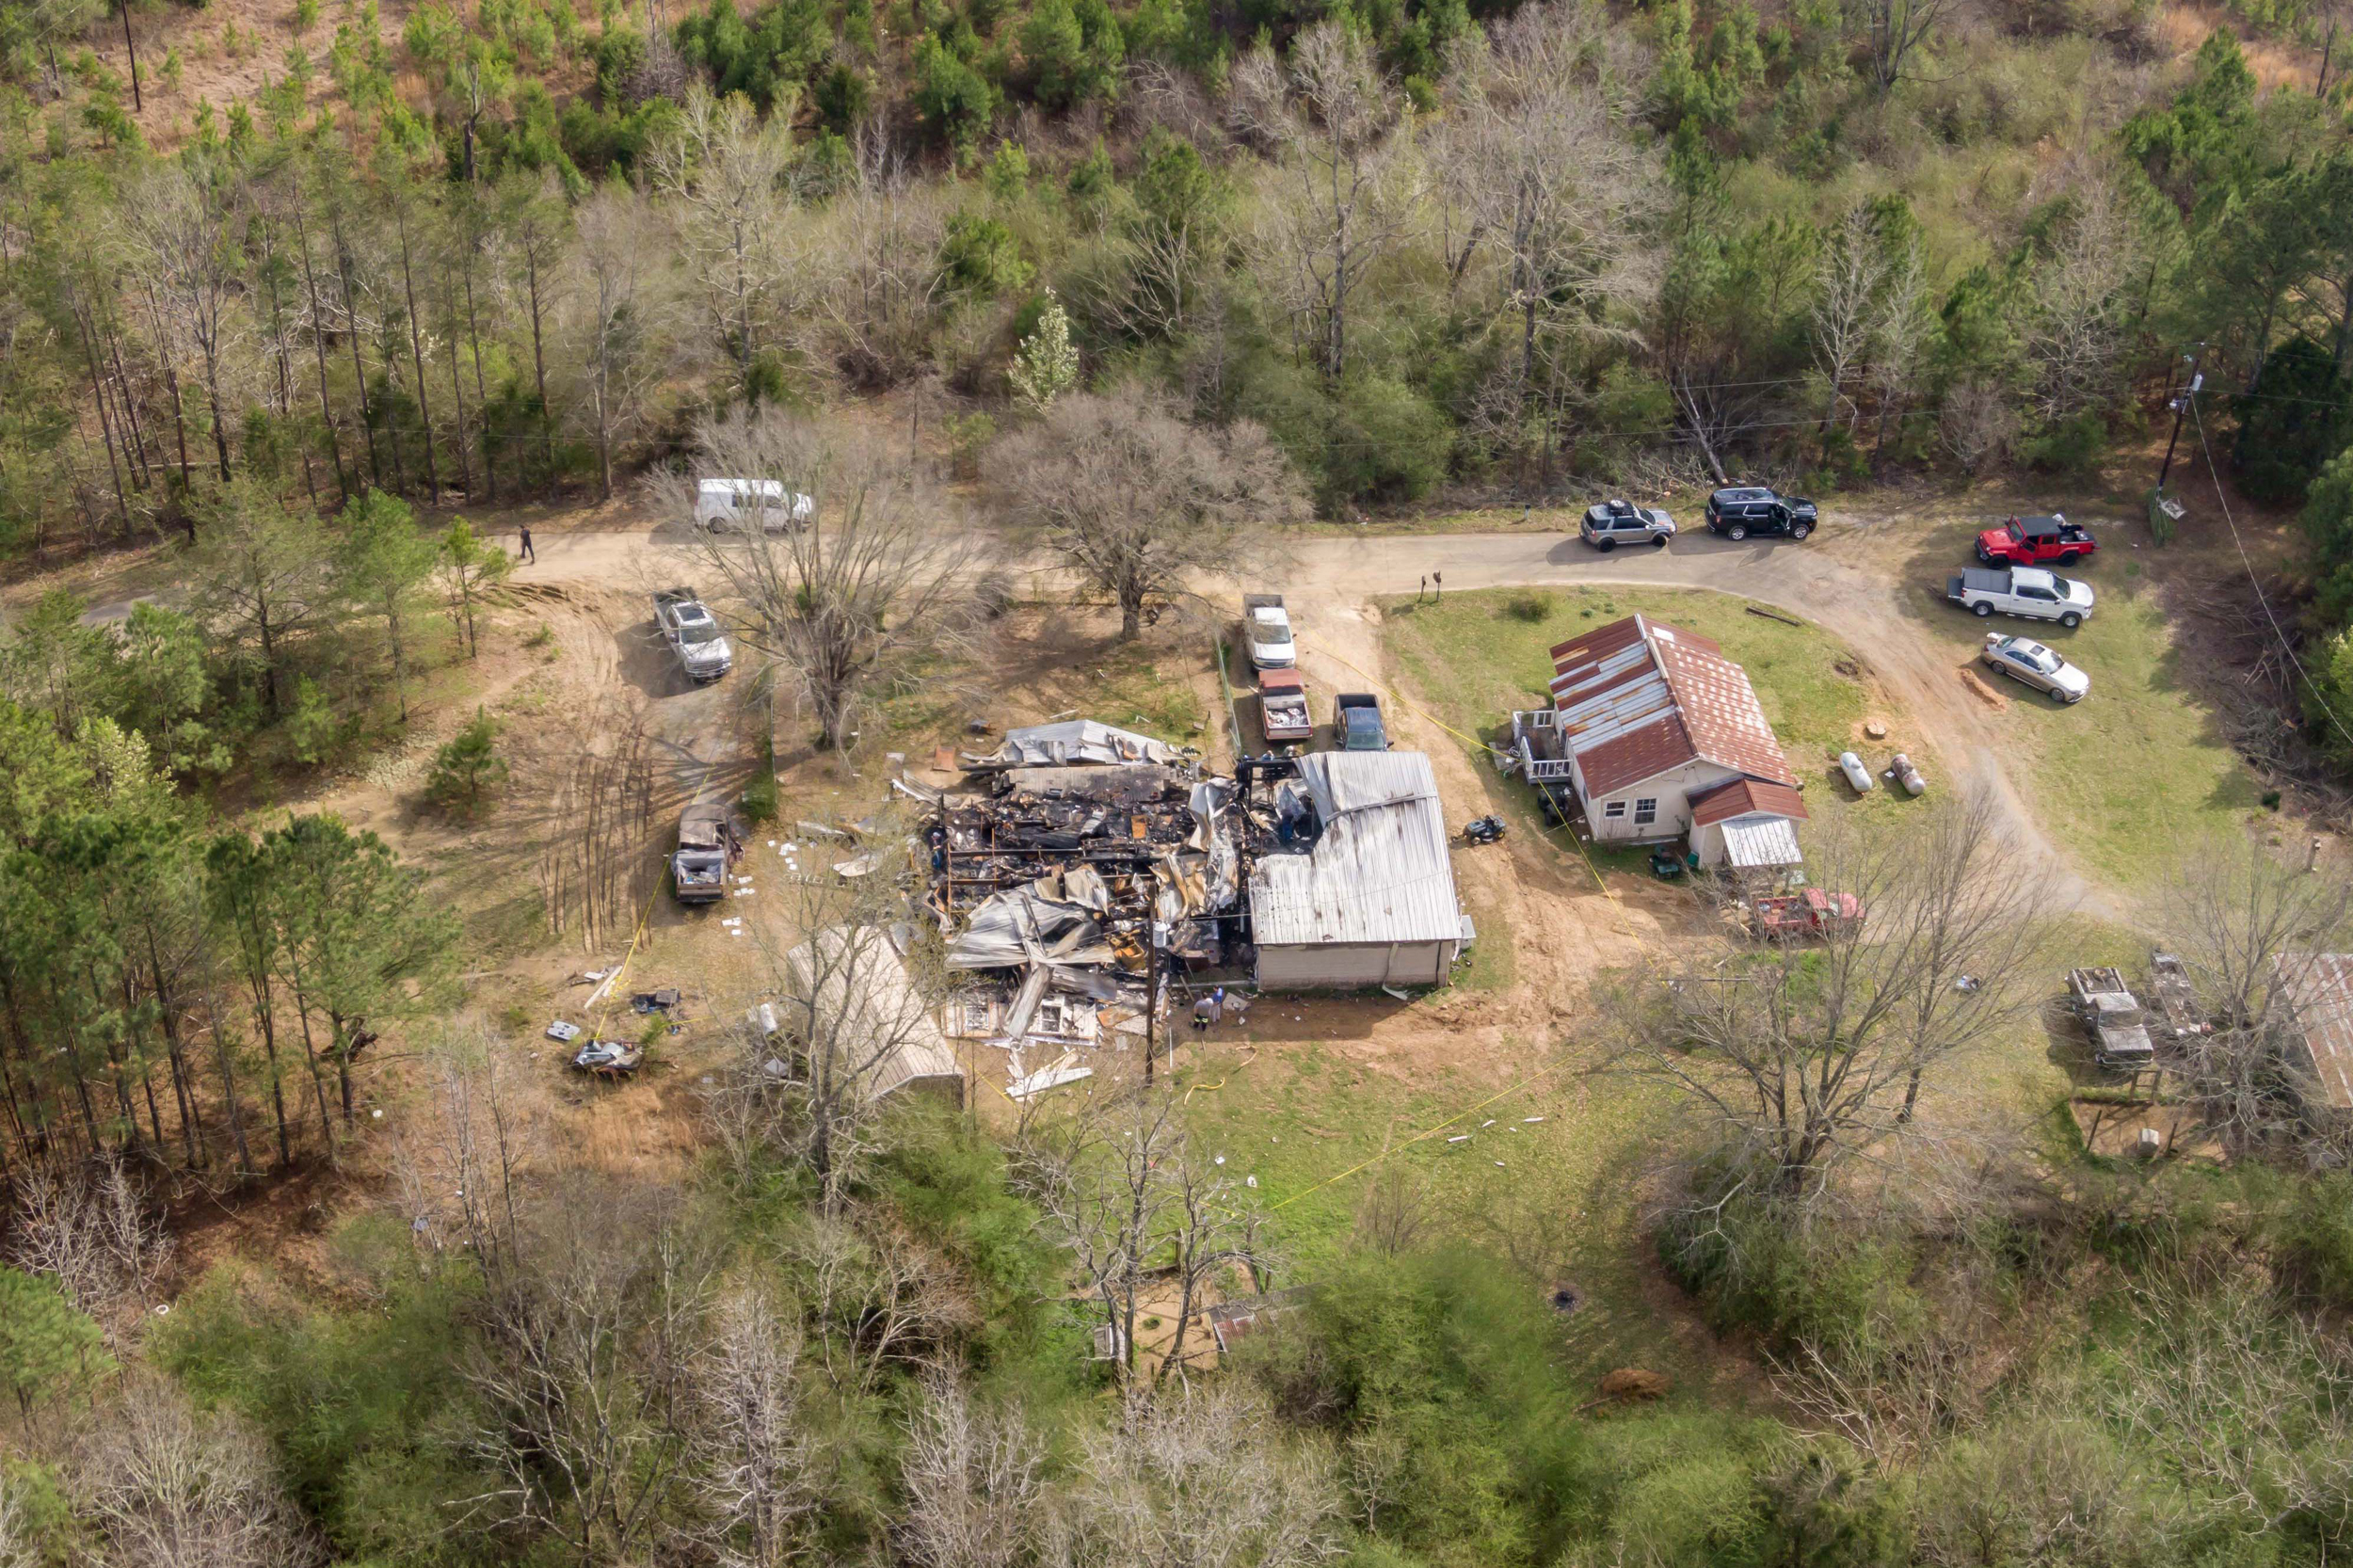 The home that exploded in Adger is one of dozens that Oak Grove Mine operators say could be impacted by subsidence. Credit: Lee Hedgepeth/Inside Climate News